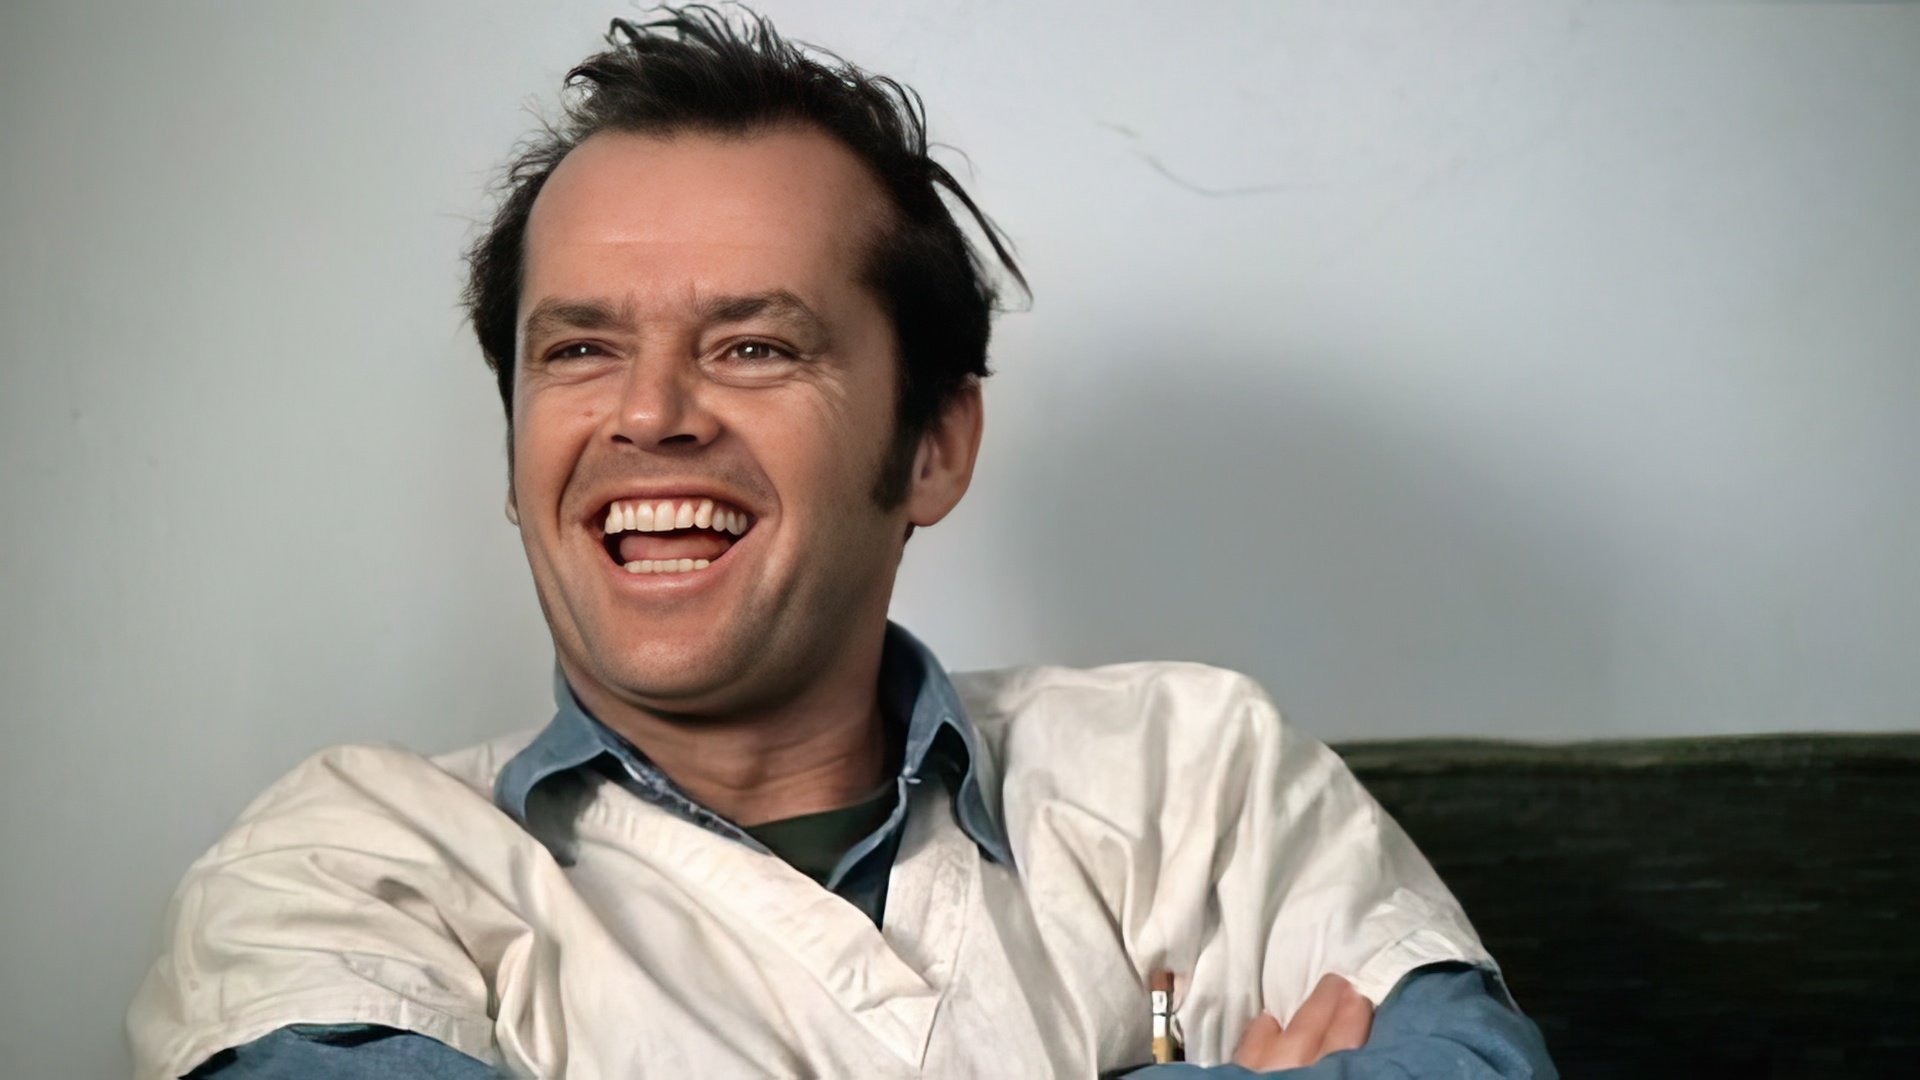 Every Jack Nicholson role has a hint of madness